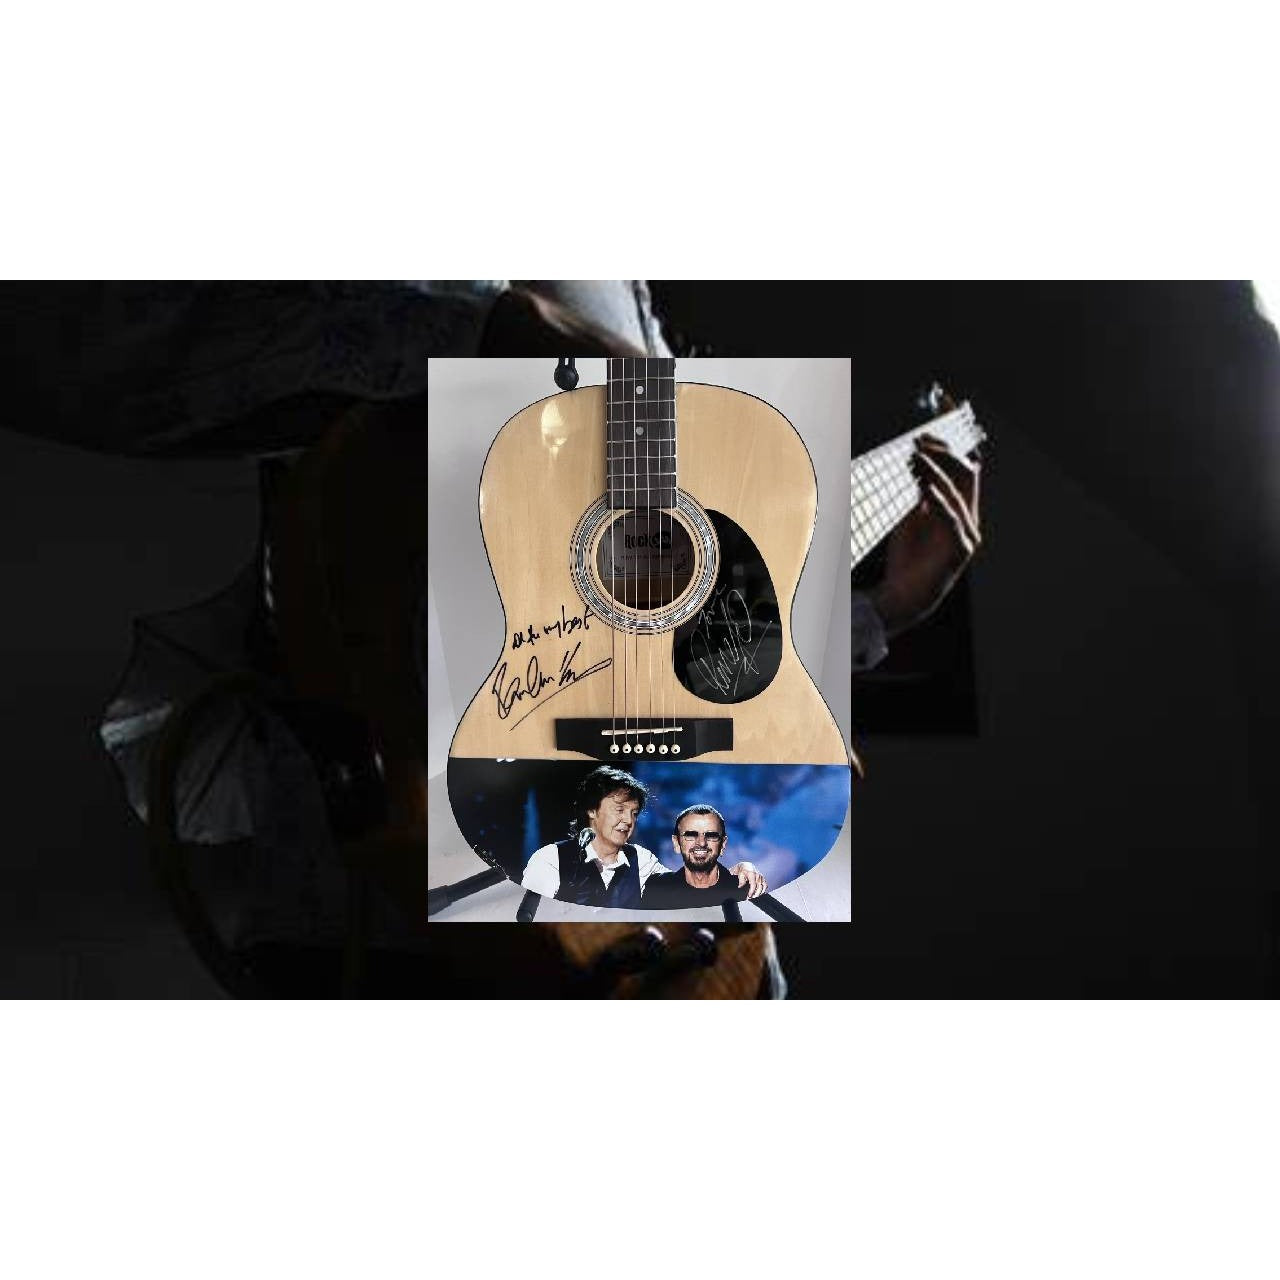 Paul McCartney & Ringo Starr of the Beatles acoustic guitar signed with proof